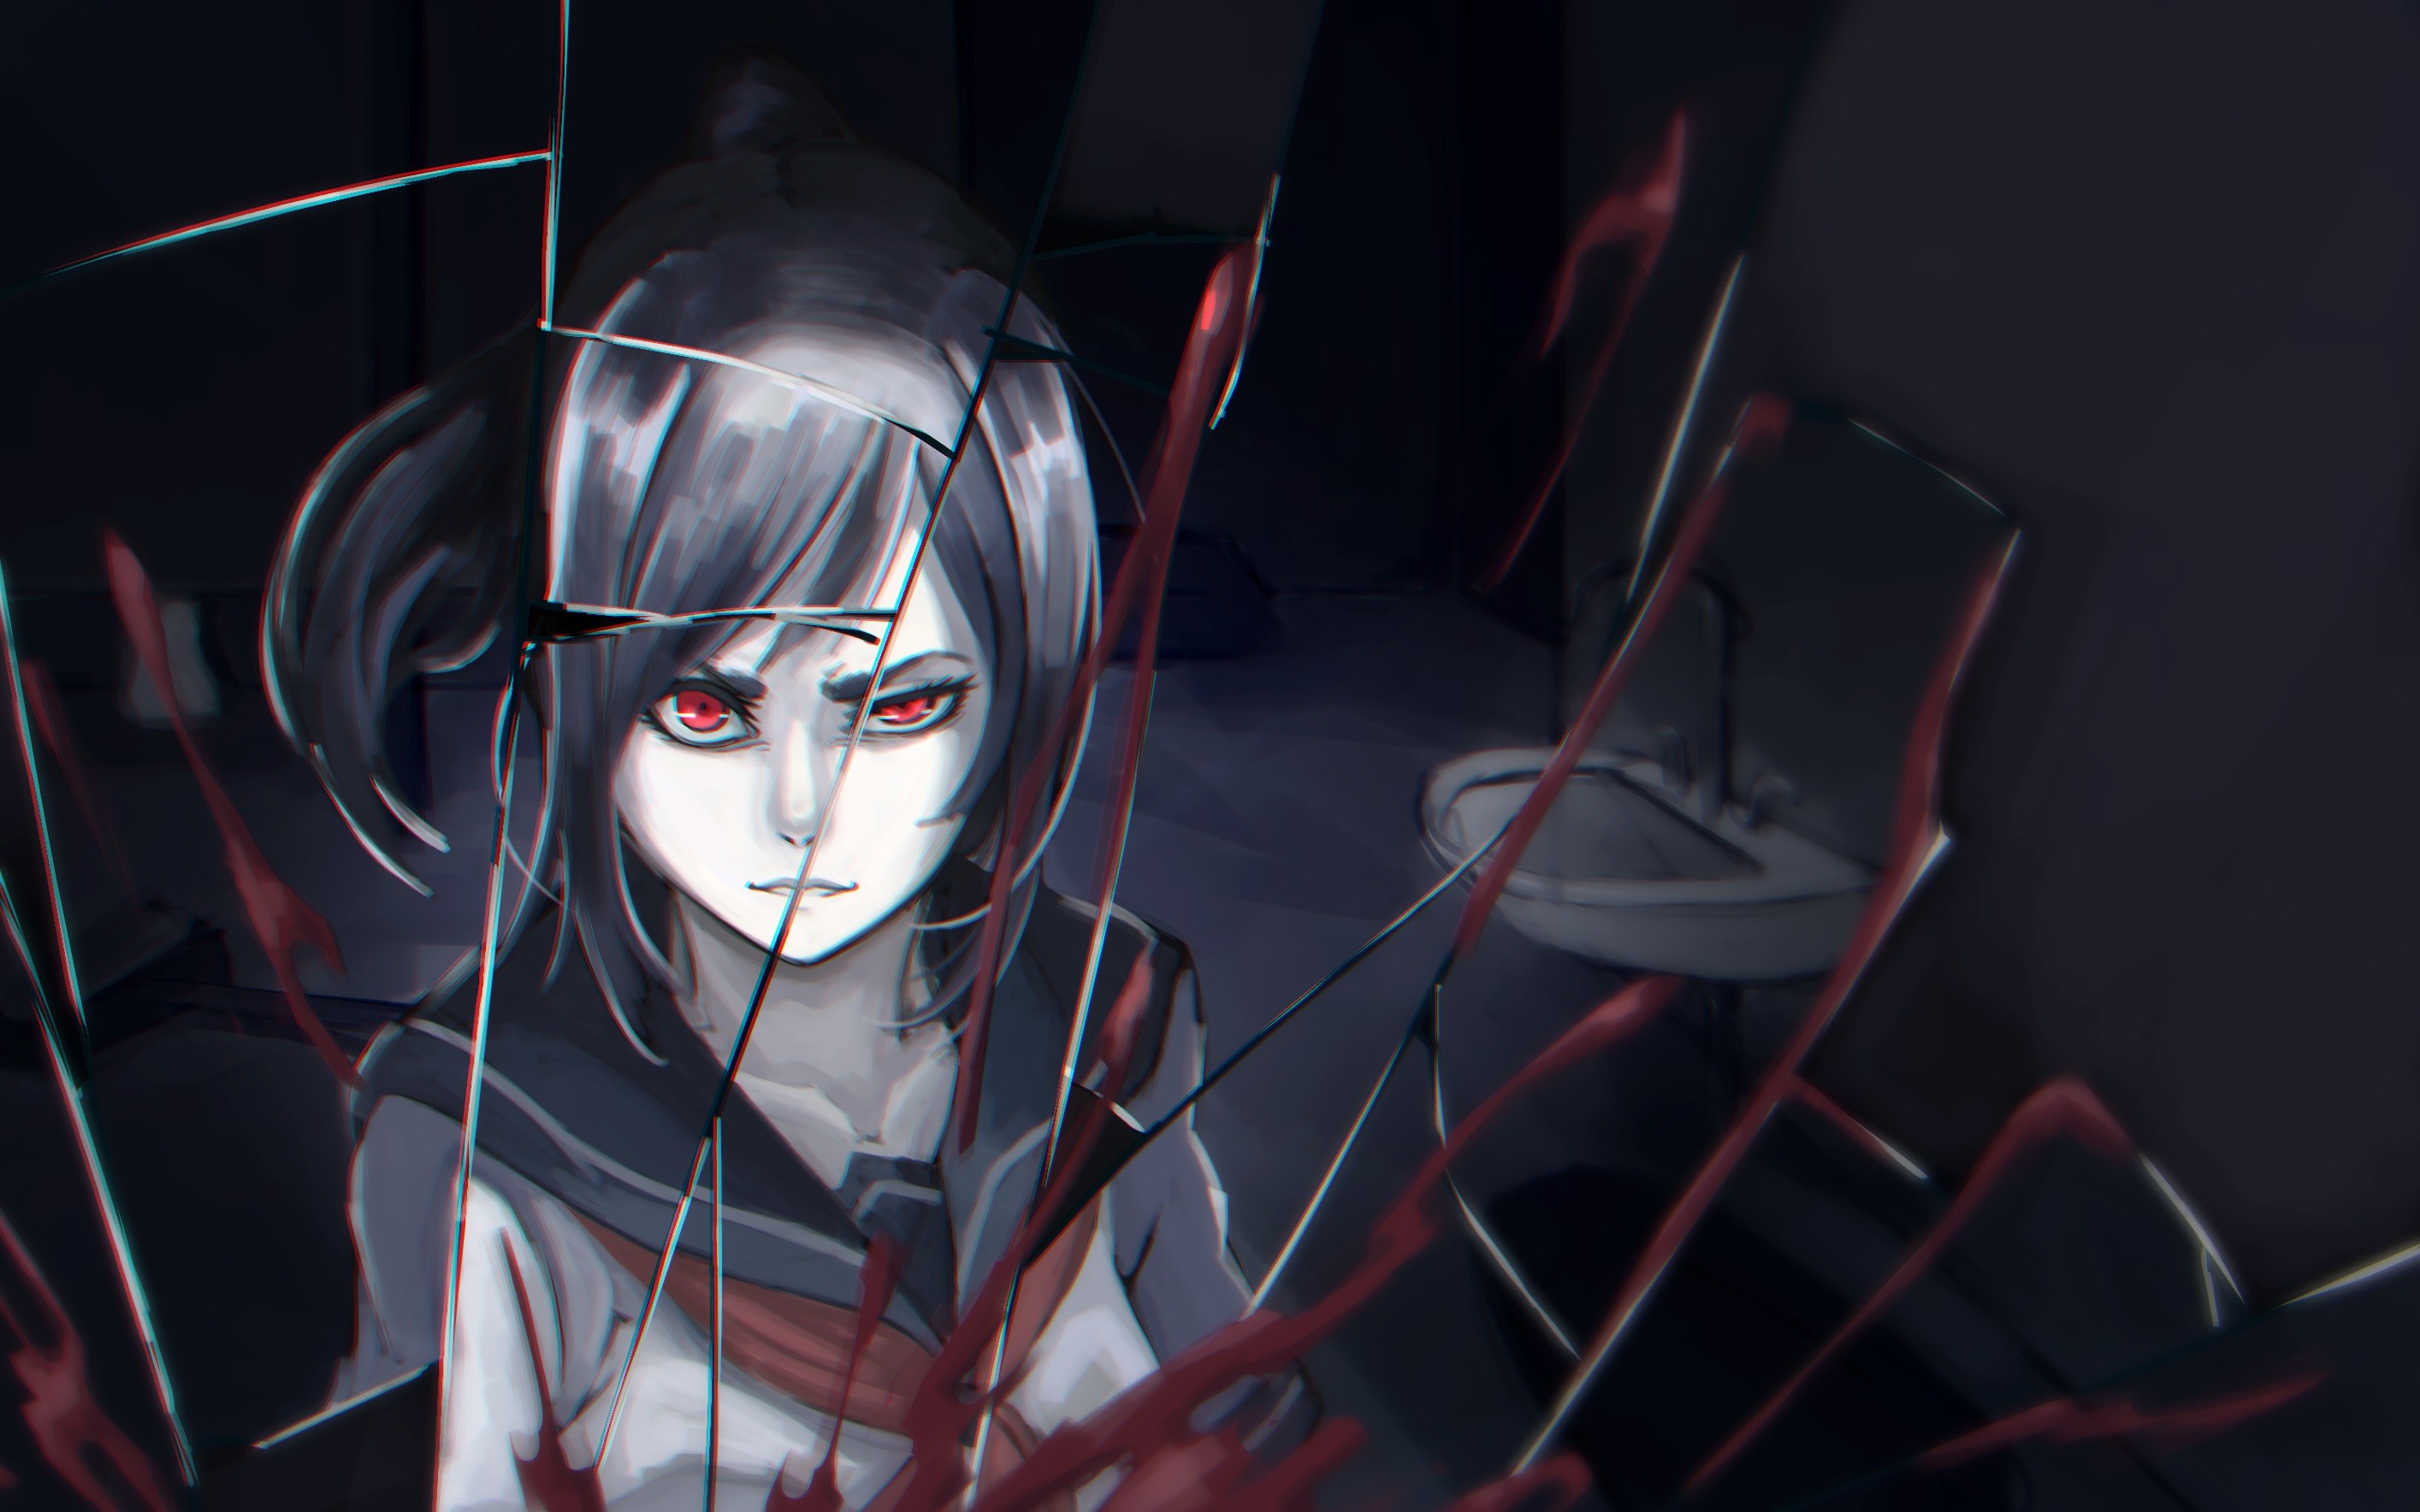 yandere wallpapers,anime,fictional character,darkness,fiction,cg artwork